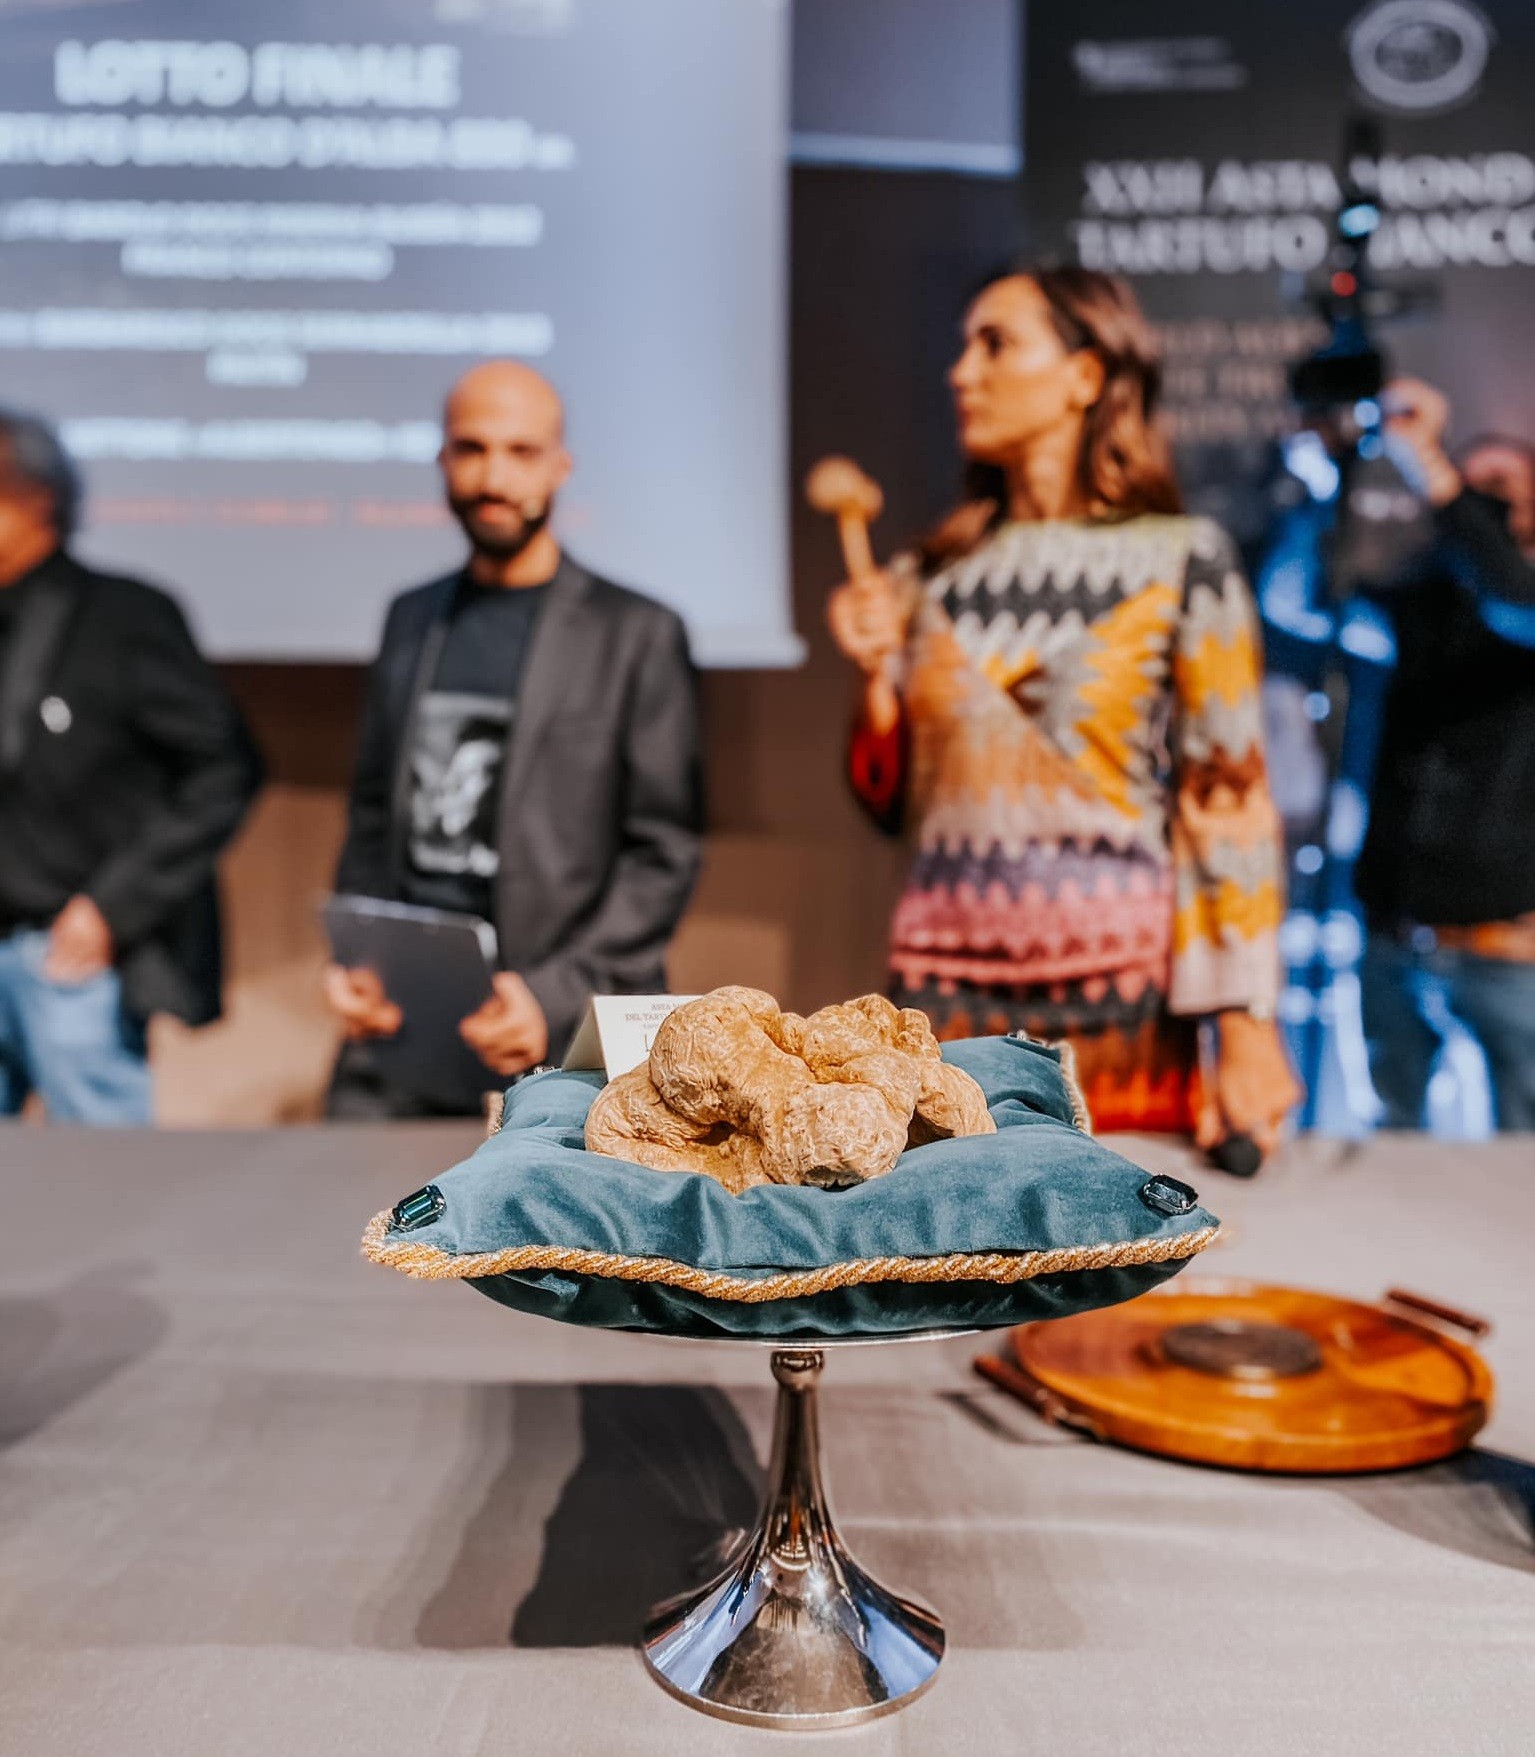 Italian Truffle Auction: Record Prices, A Piece Sold Over 100 Thousand Euros